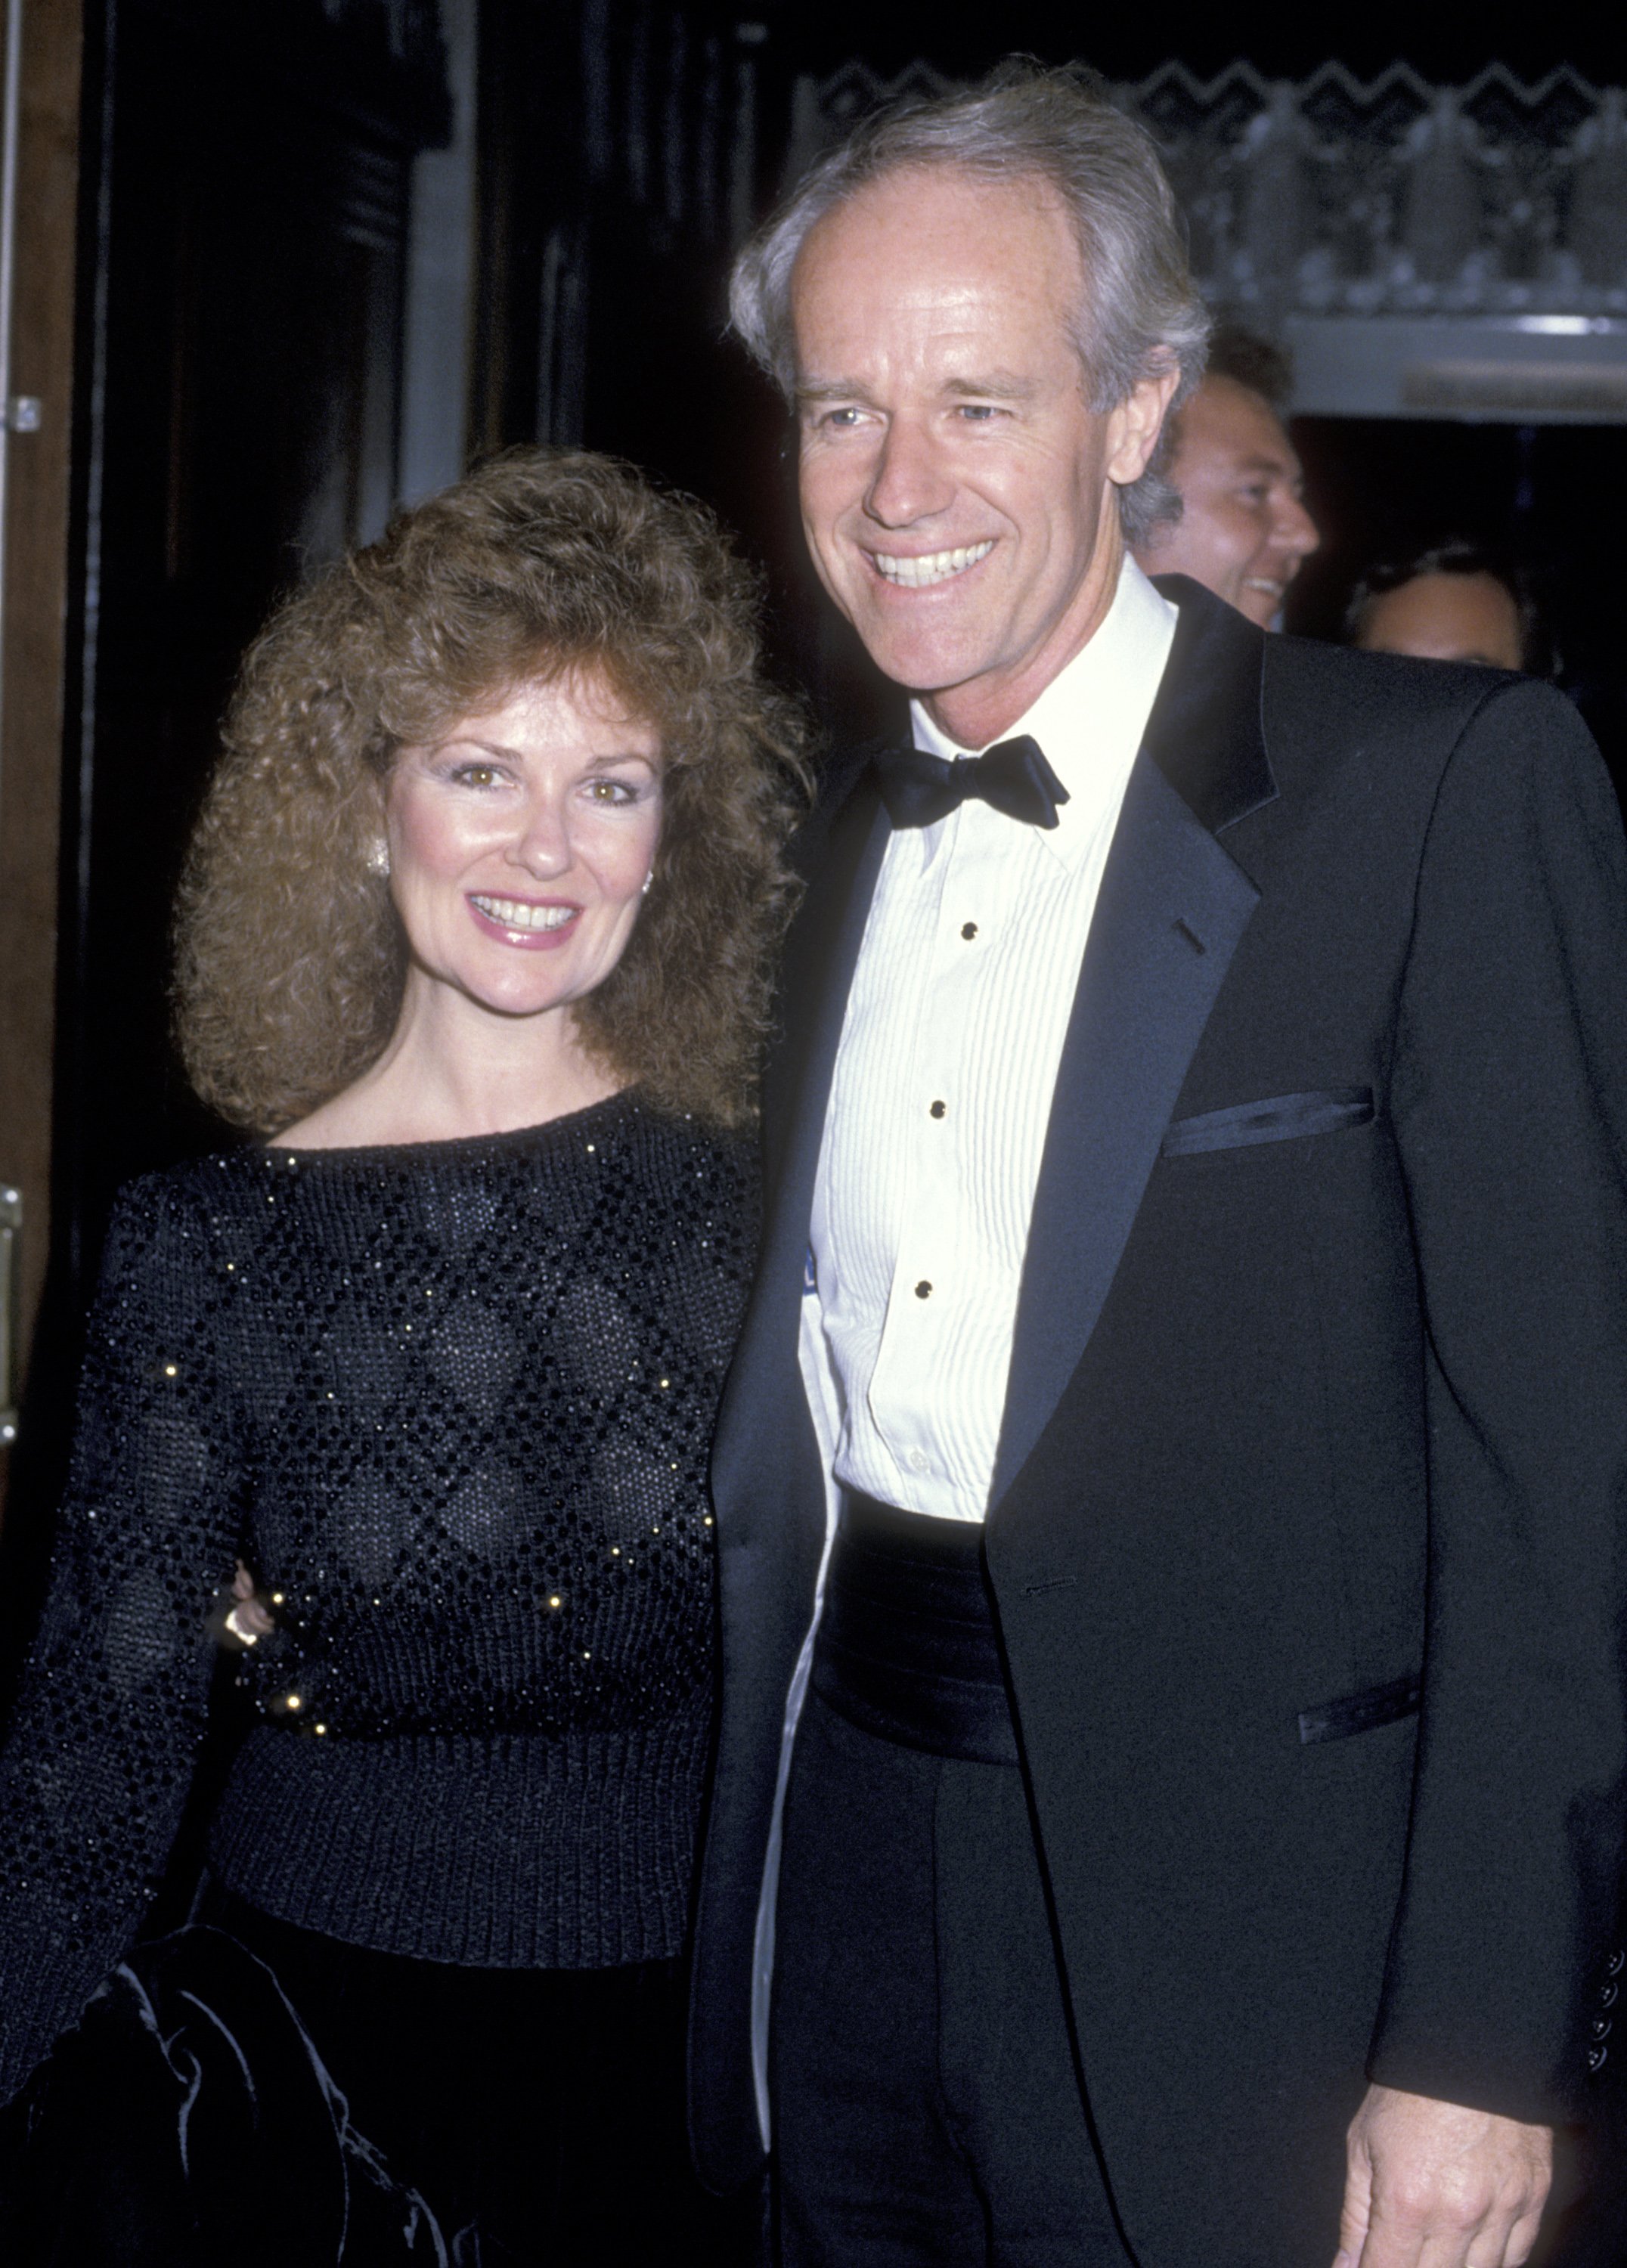 Shelley Fabares and Mike Farrell attend the Second Annual Commitment to Life Gala benefitting the AIDS Project at Wiltern Theatre on September 20, 1986 in Los Angeles, California. | Source: Getty Images